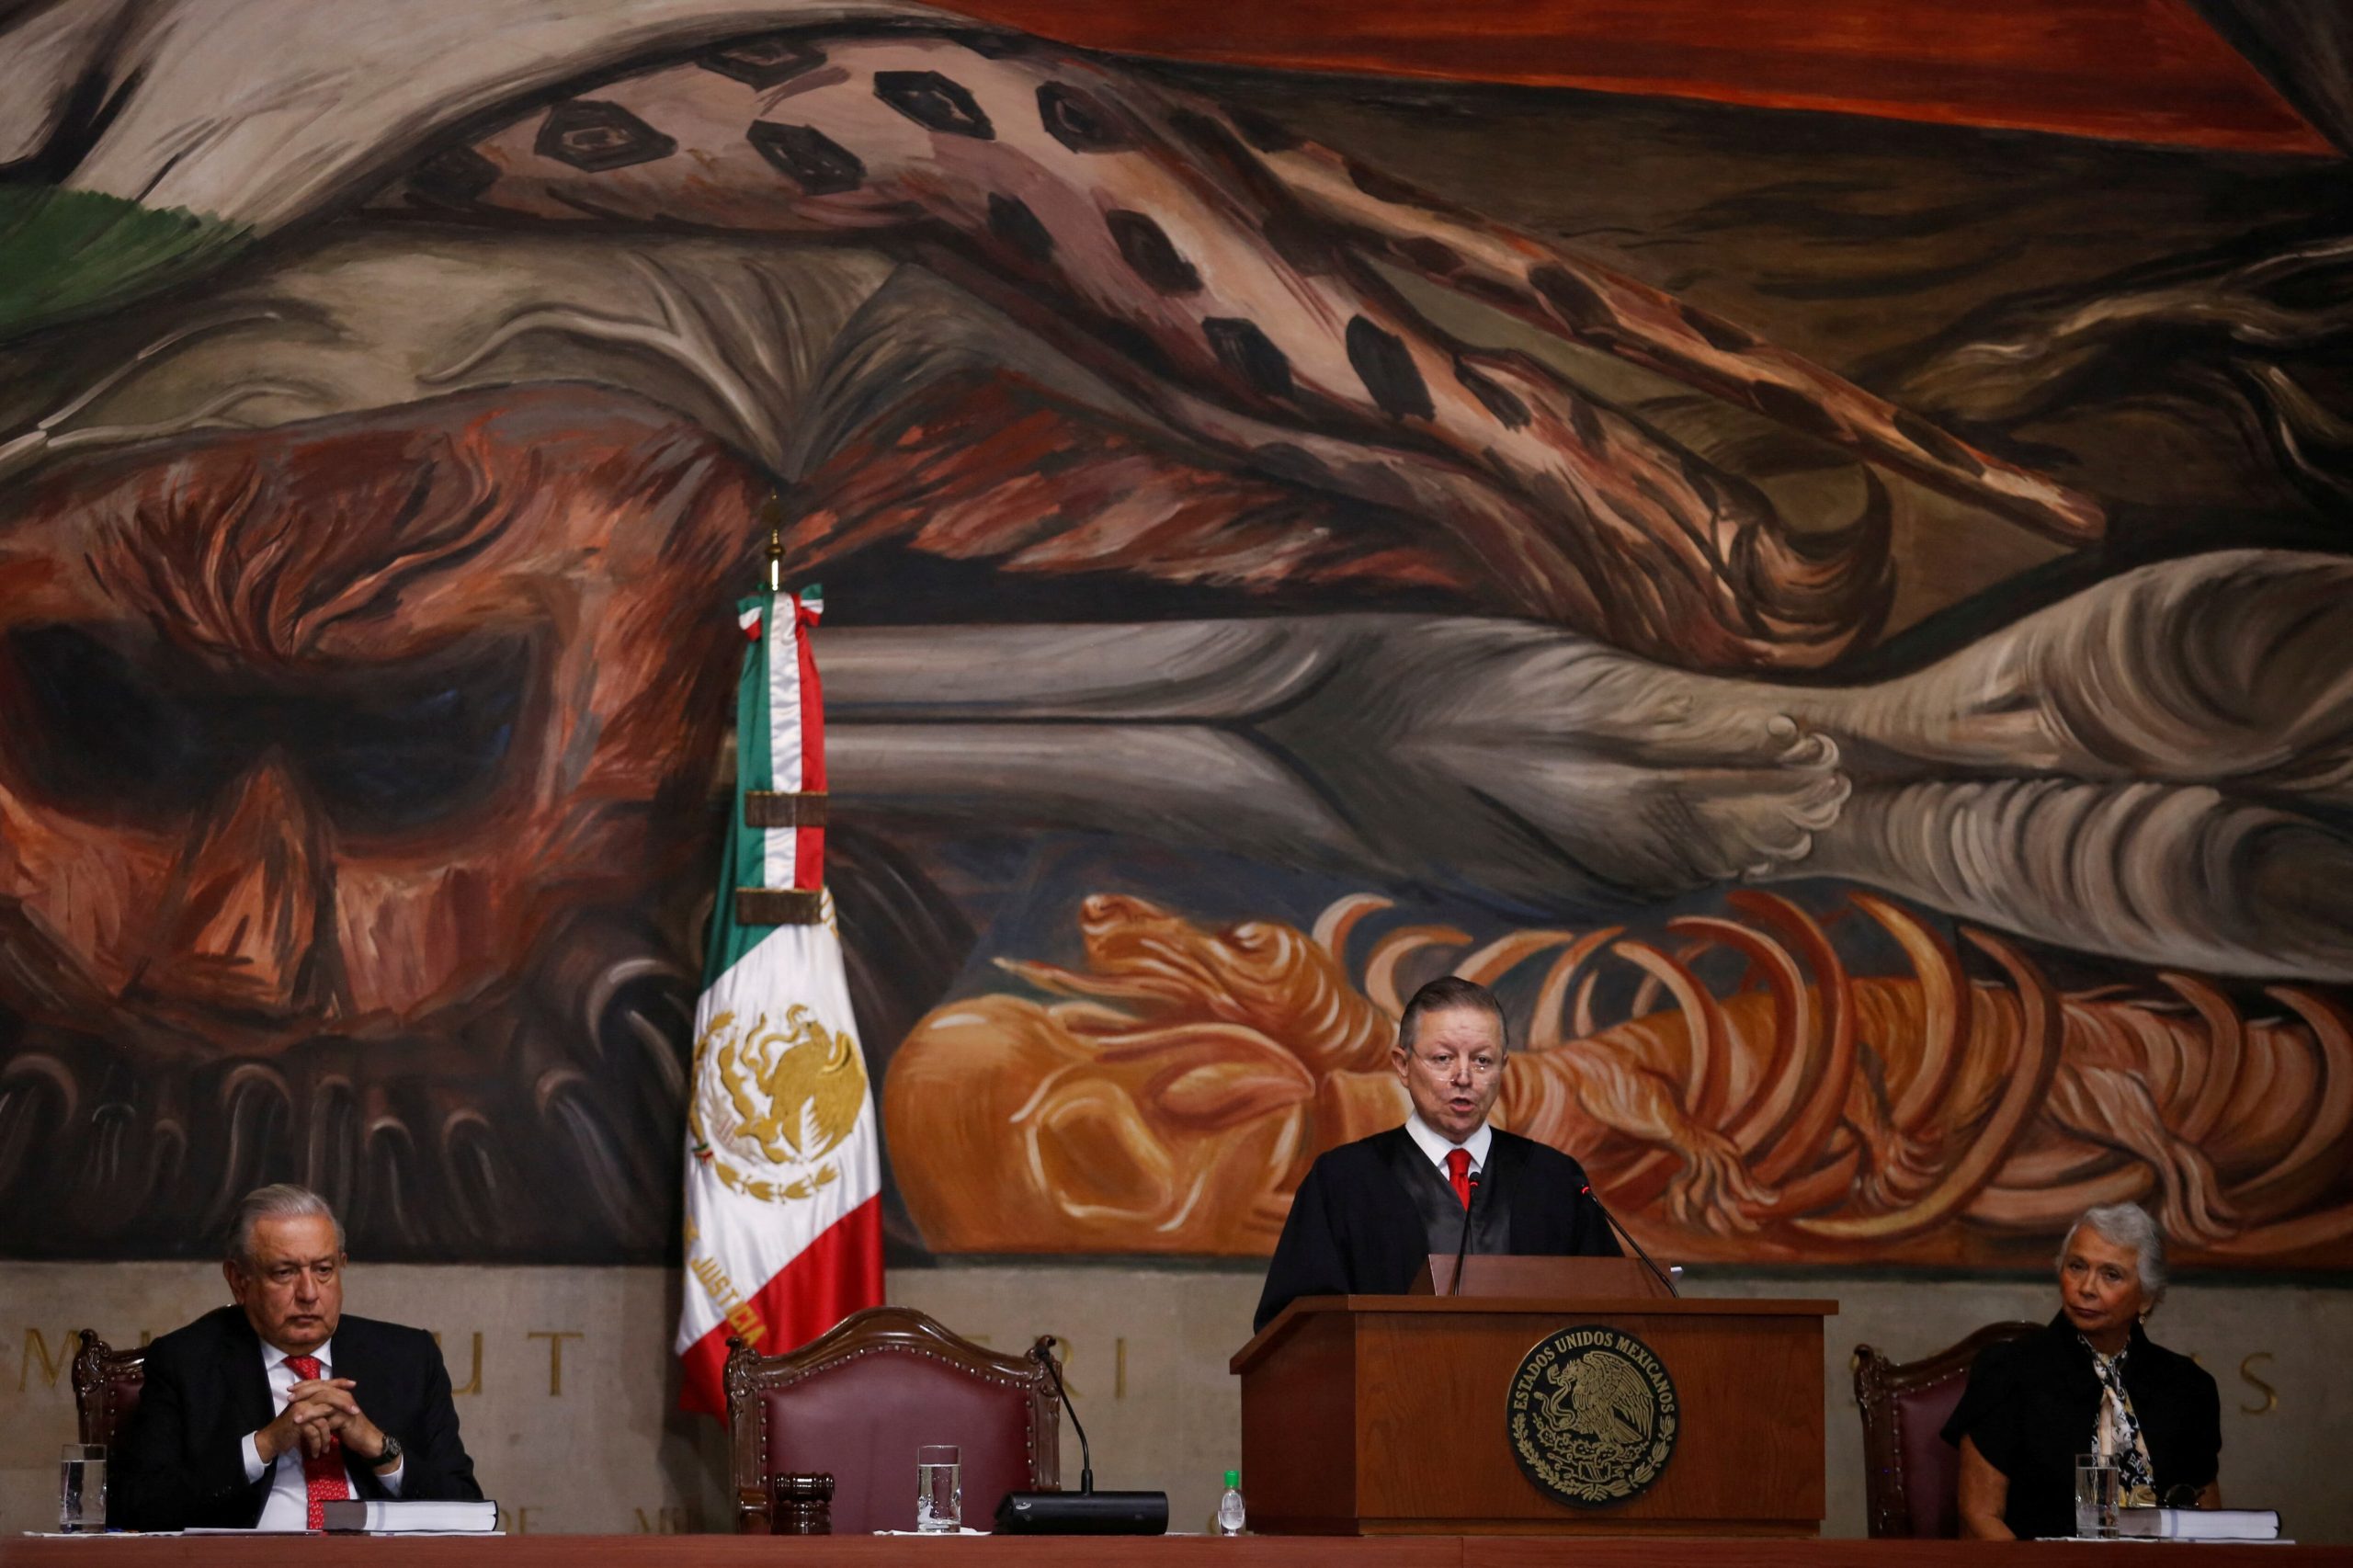 Mexico's Supreme Court Rejects Electricity Legislation Favoring State-Owned Utility at the Expense of Private Companies.